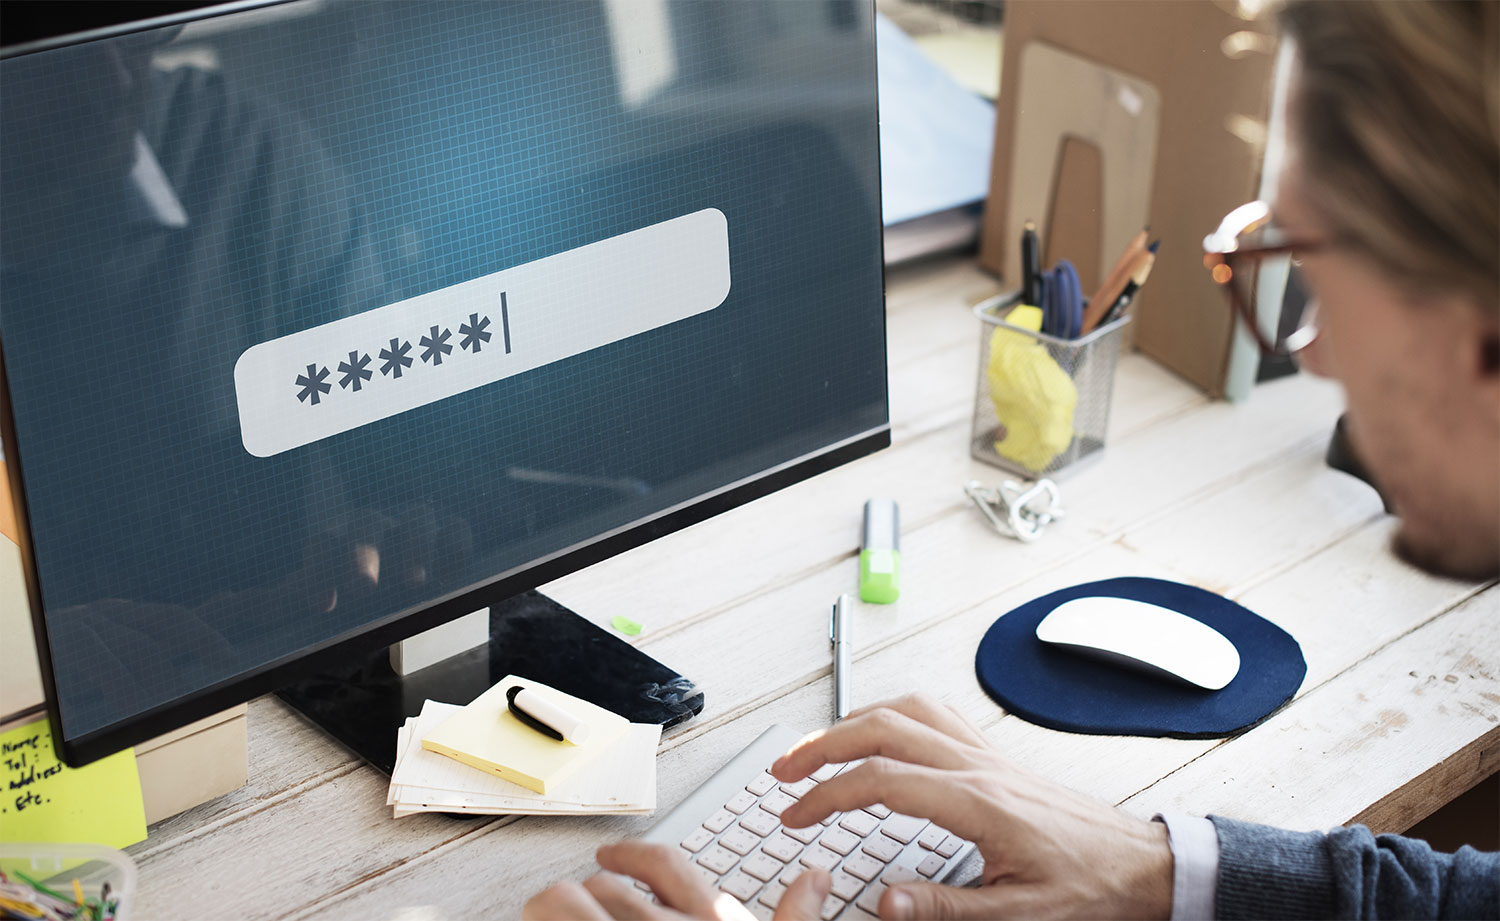 7 Best Password Managers for Businesses in 2022